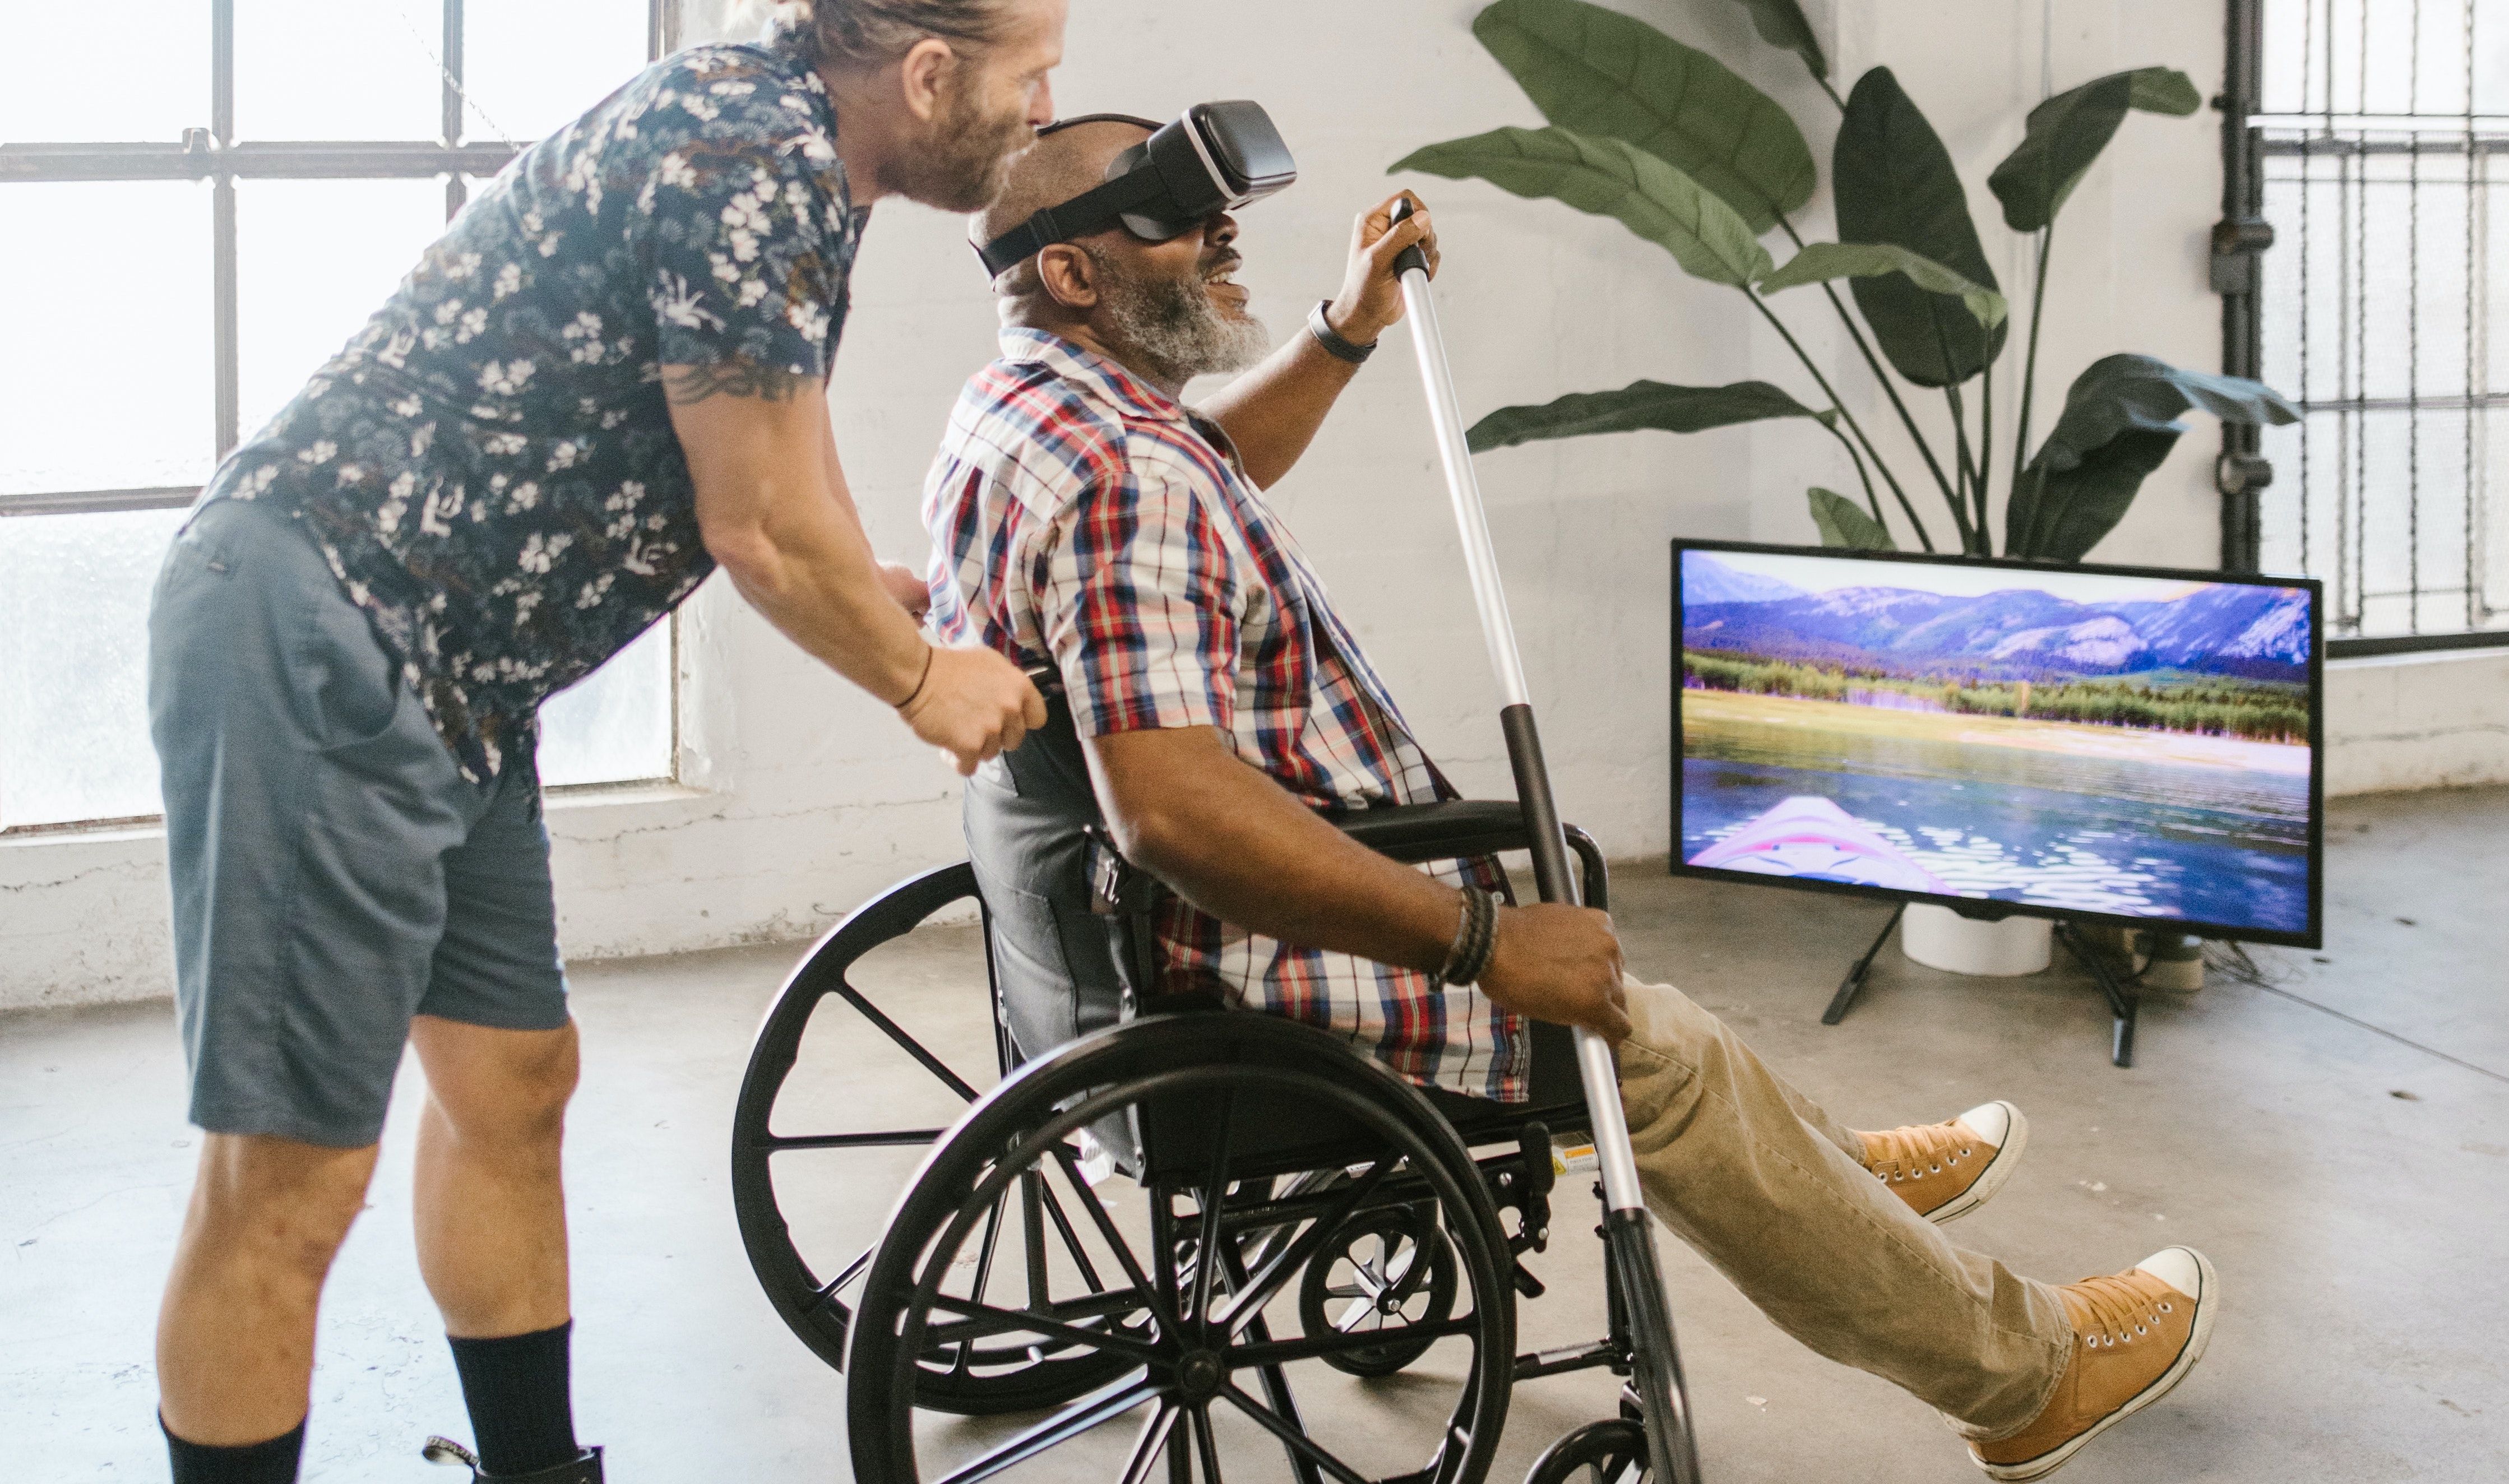 Assistant and Man with VR Headset in Wheelchair